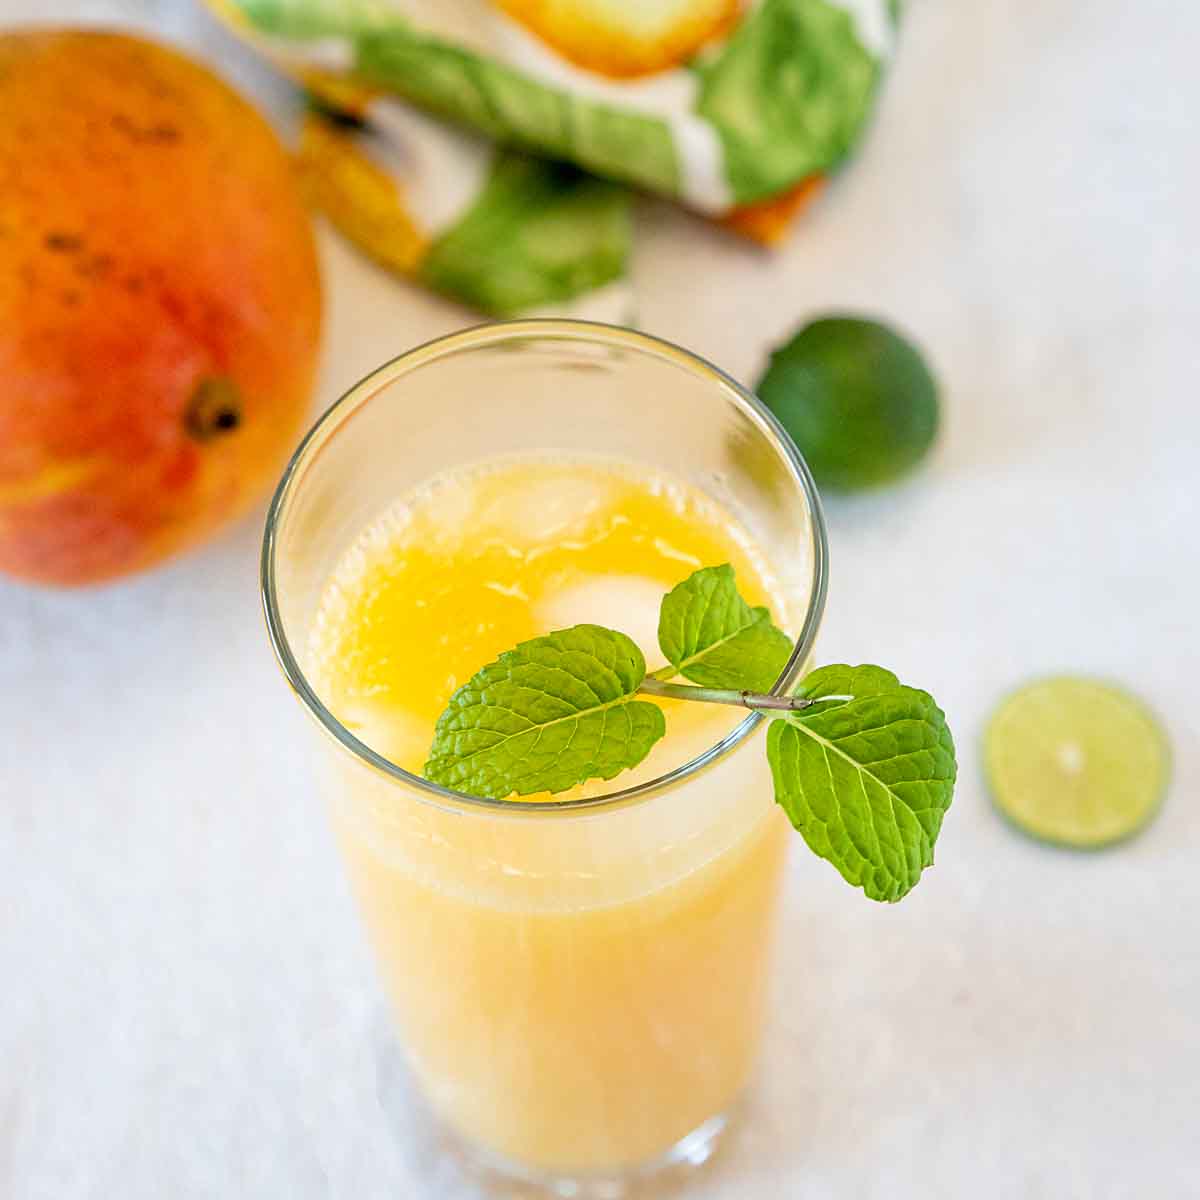 Fruity and refreshing, a Mango Agua Fresca is a summer beverage that's perfect with meals or for snacking.